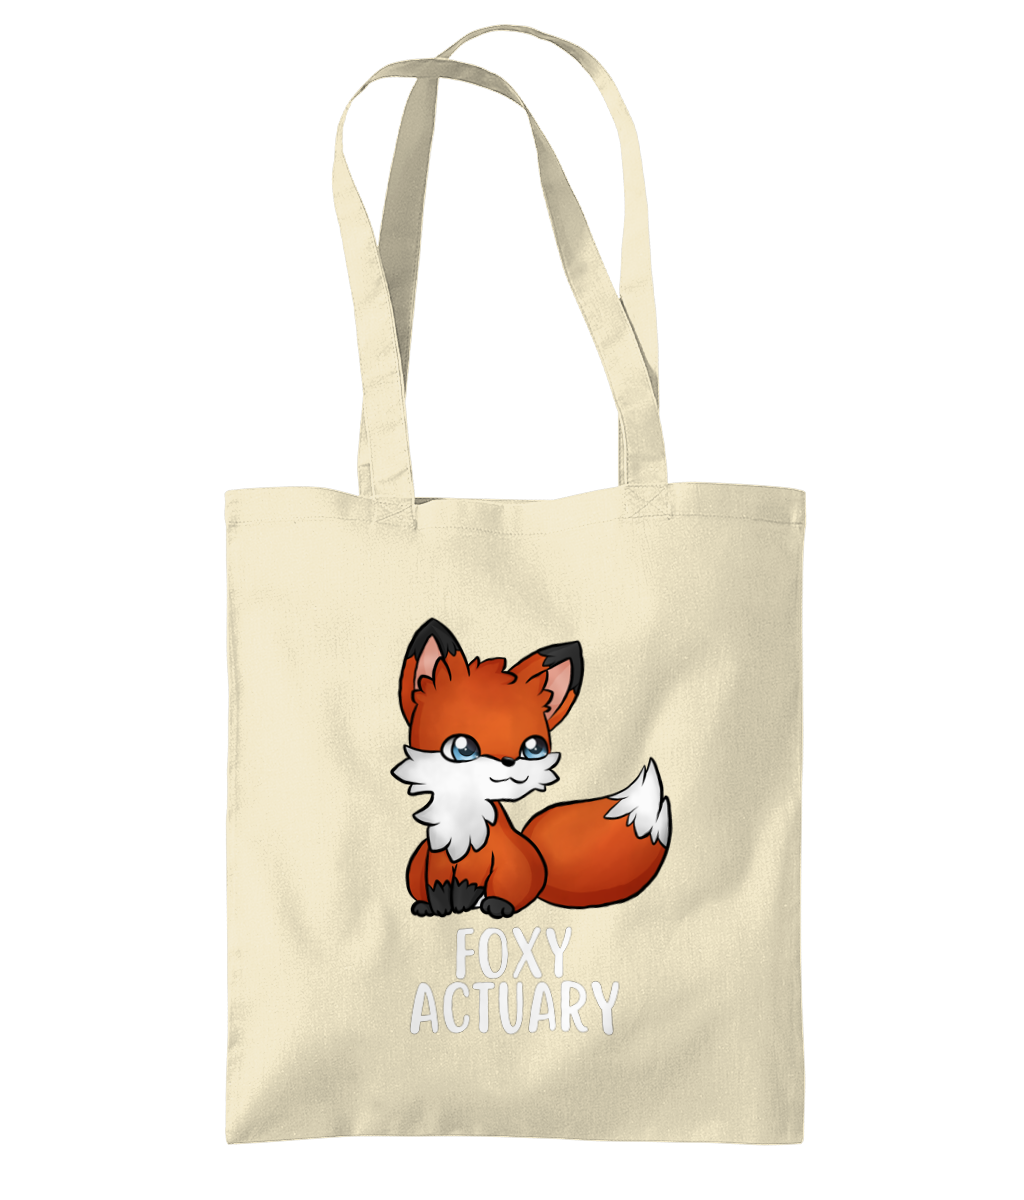 Tote Bag Foxy Actuary (Black and Tan Variants)